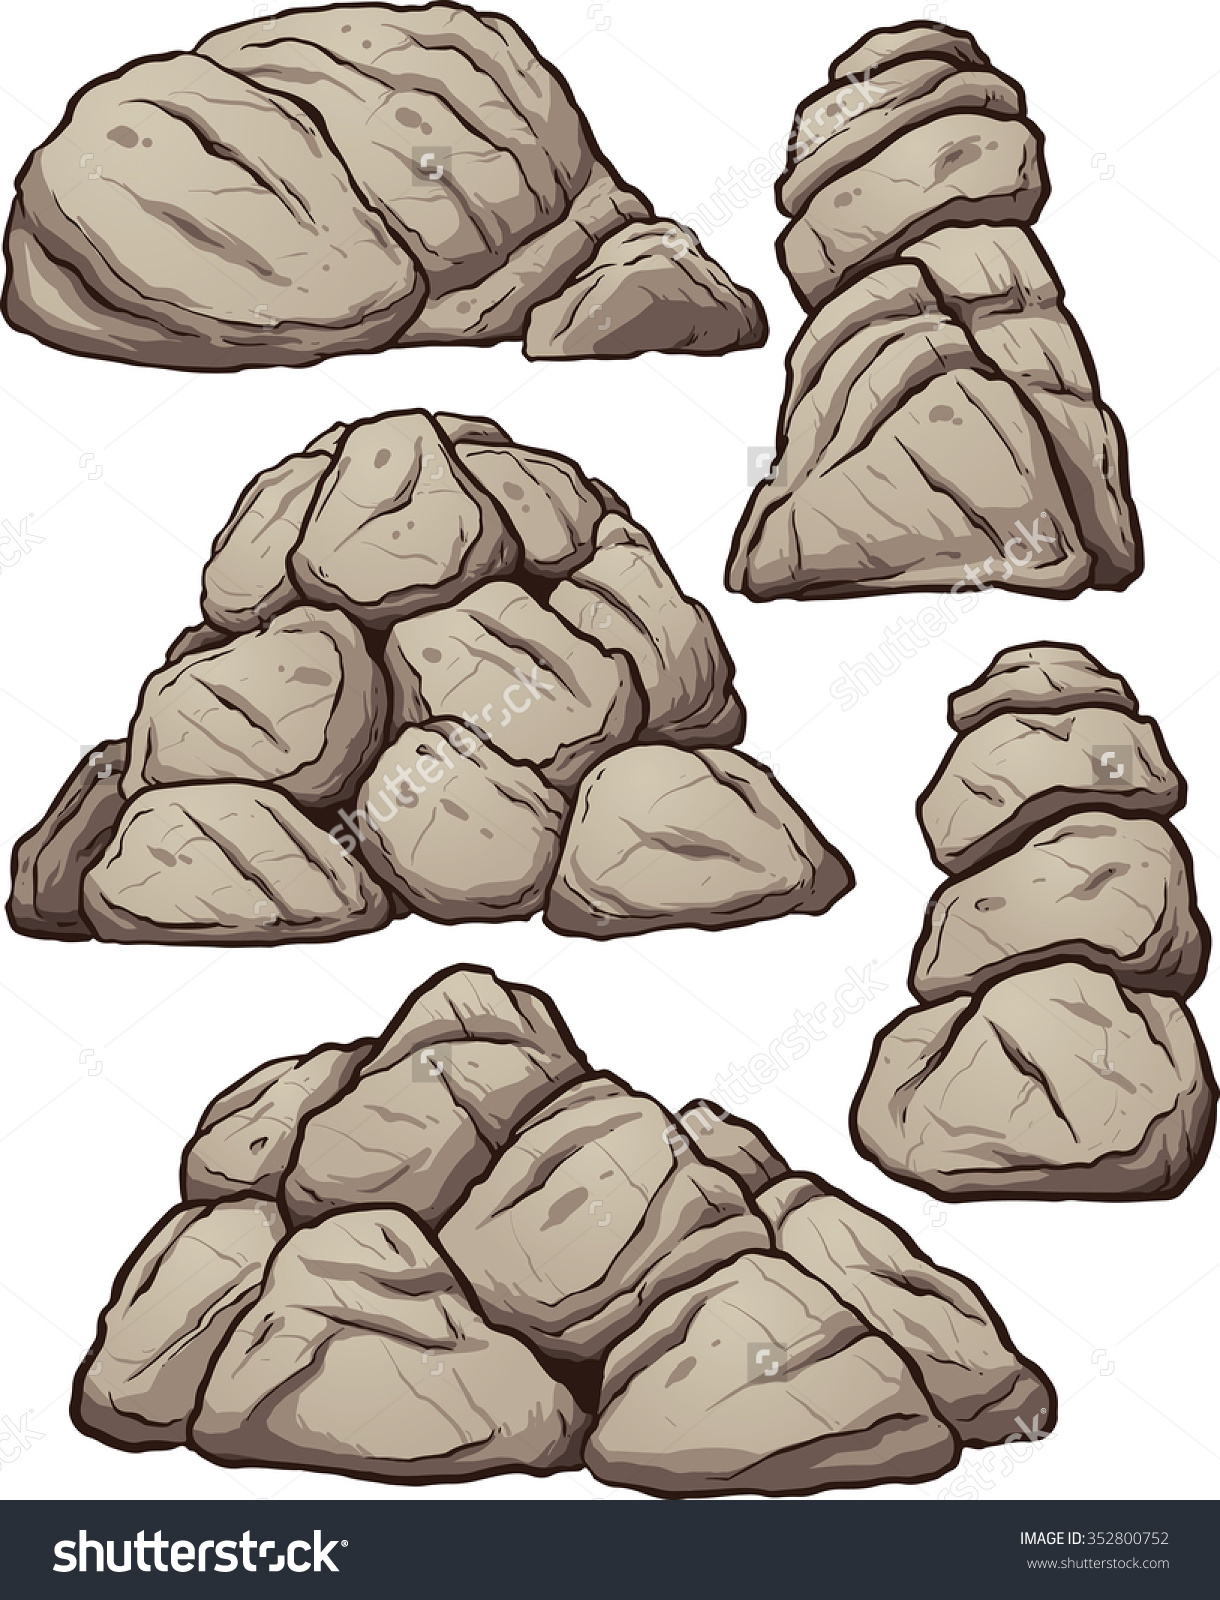 Piles of rocks. Vector clip art illustration with simple gradients. Each pile on a